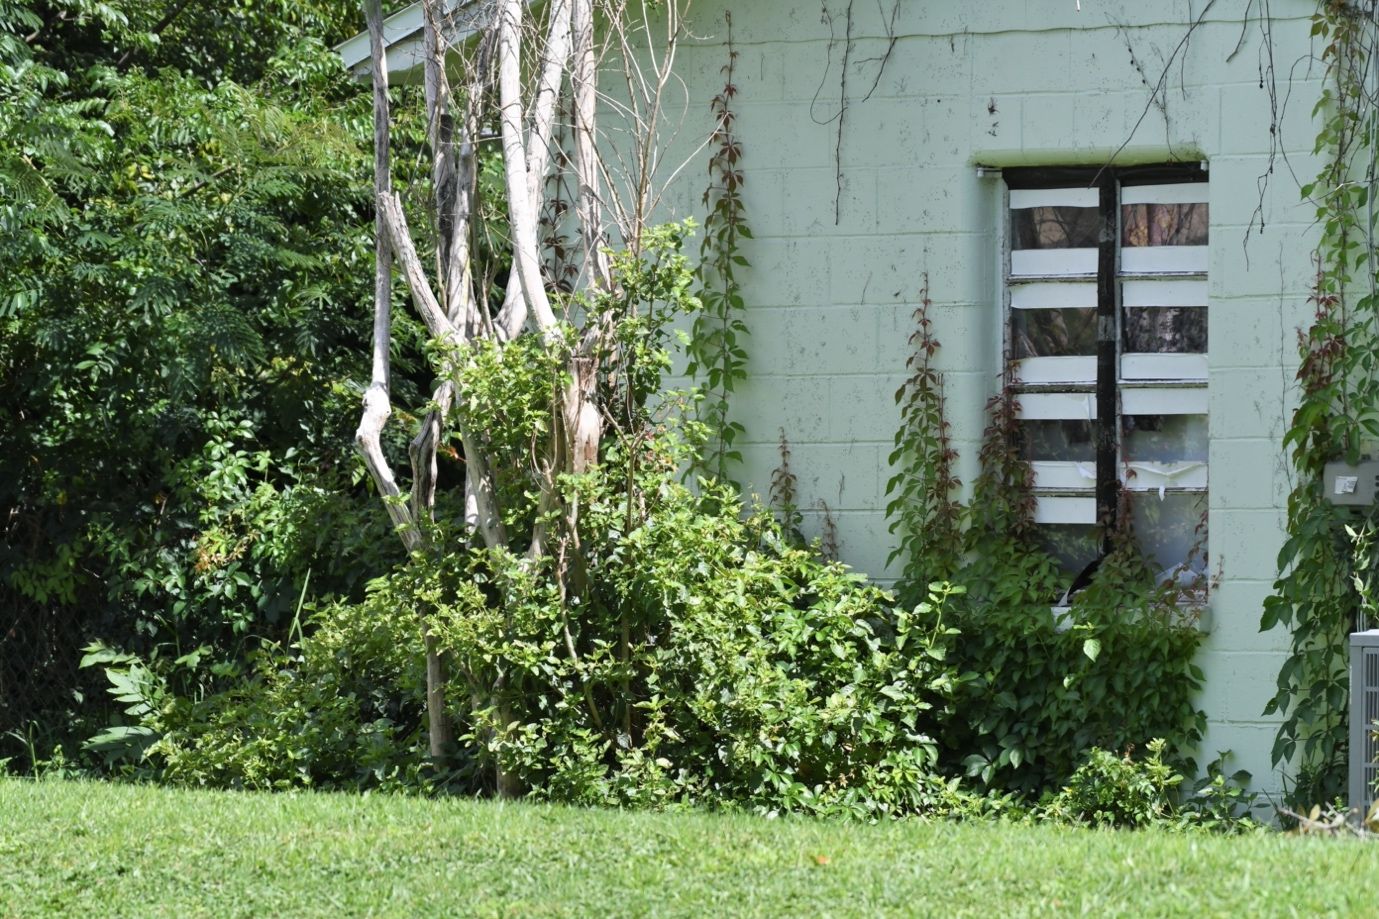 Overgrown shrubs and vines make attractive harborages for pests. 